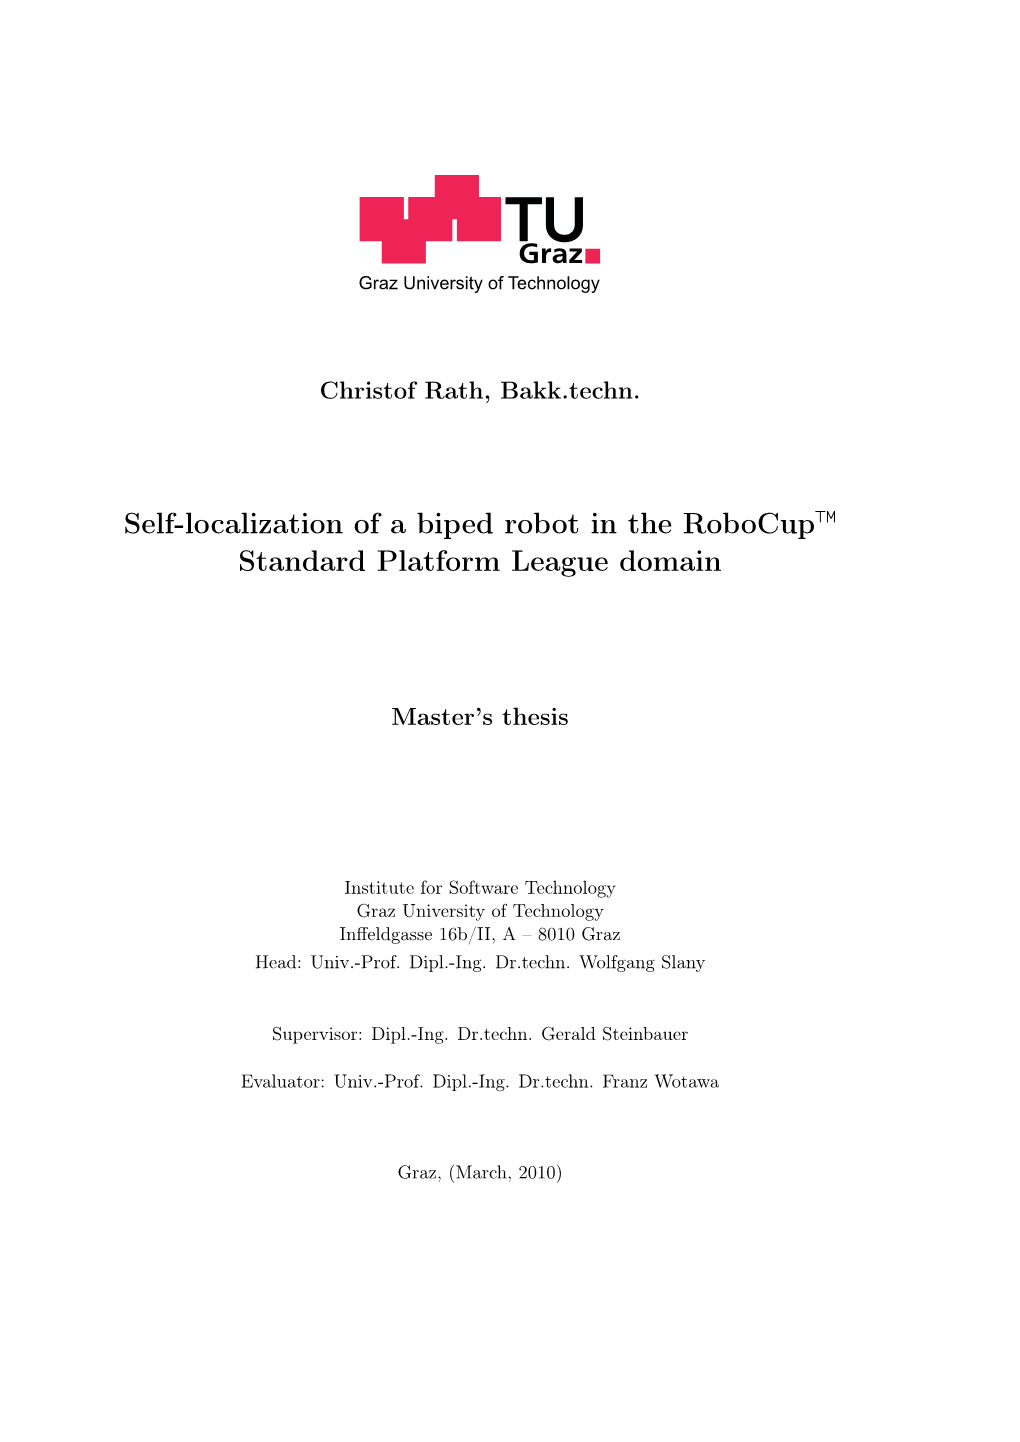 Self-Localization of a Biped Robot in the Robocup™ Standard Platform League Domain